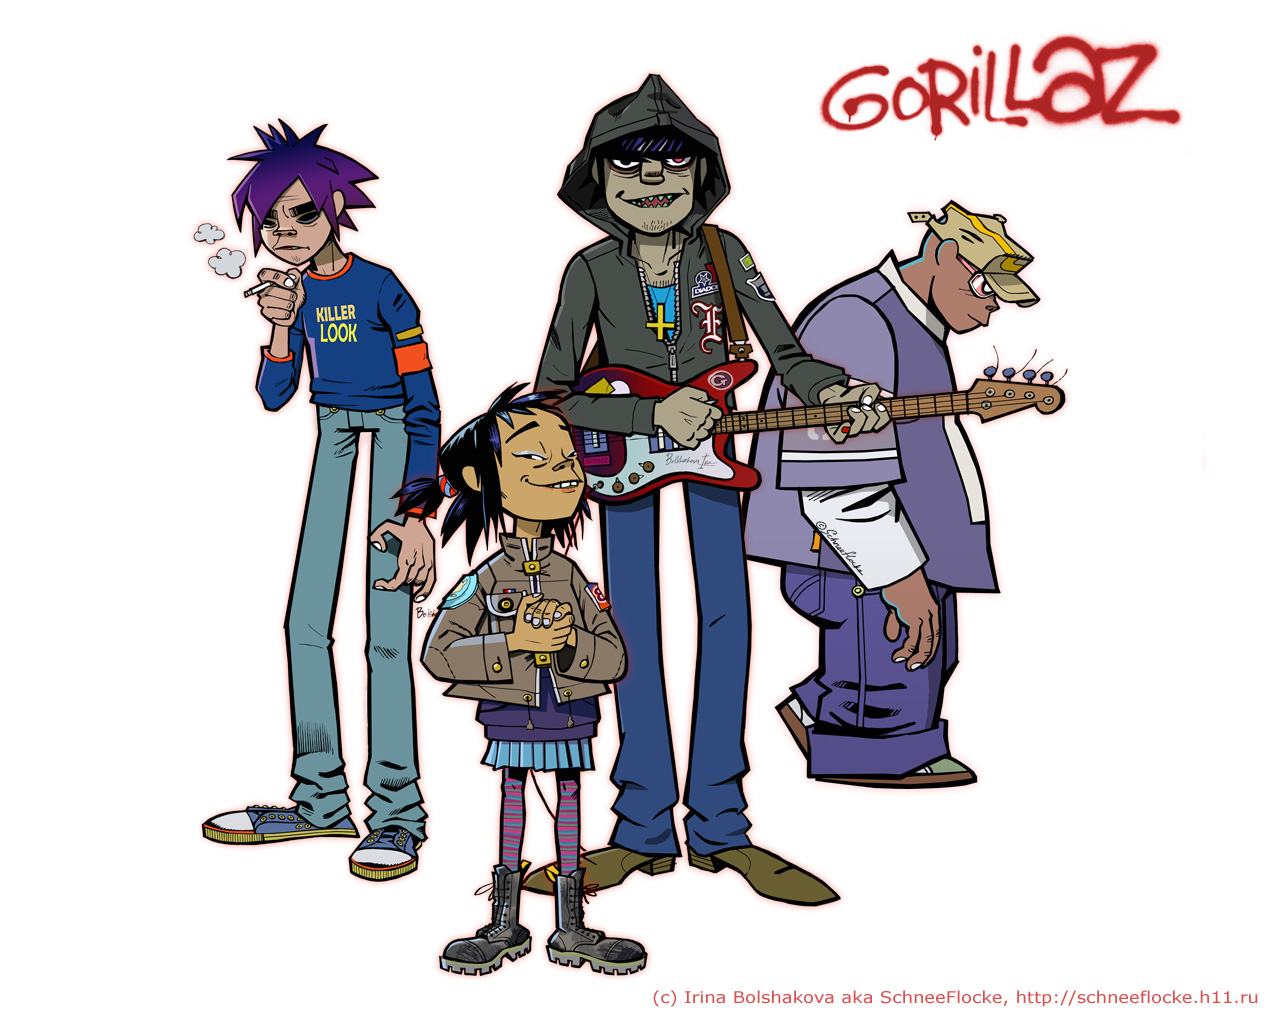 Best of the Gorillaz by Druidhaven